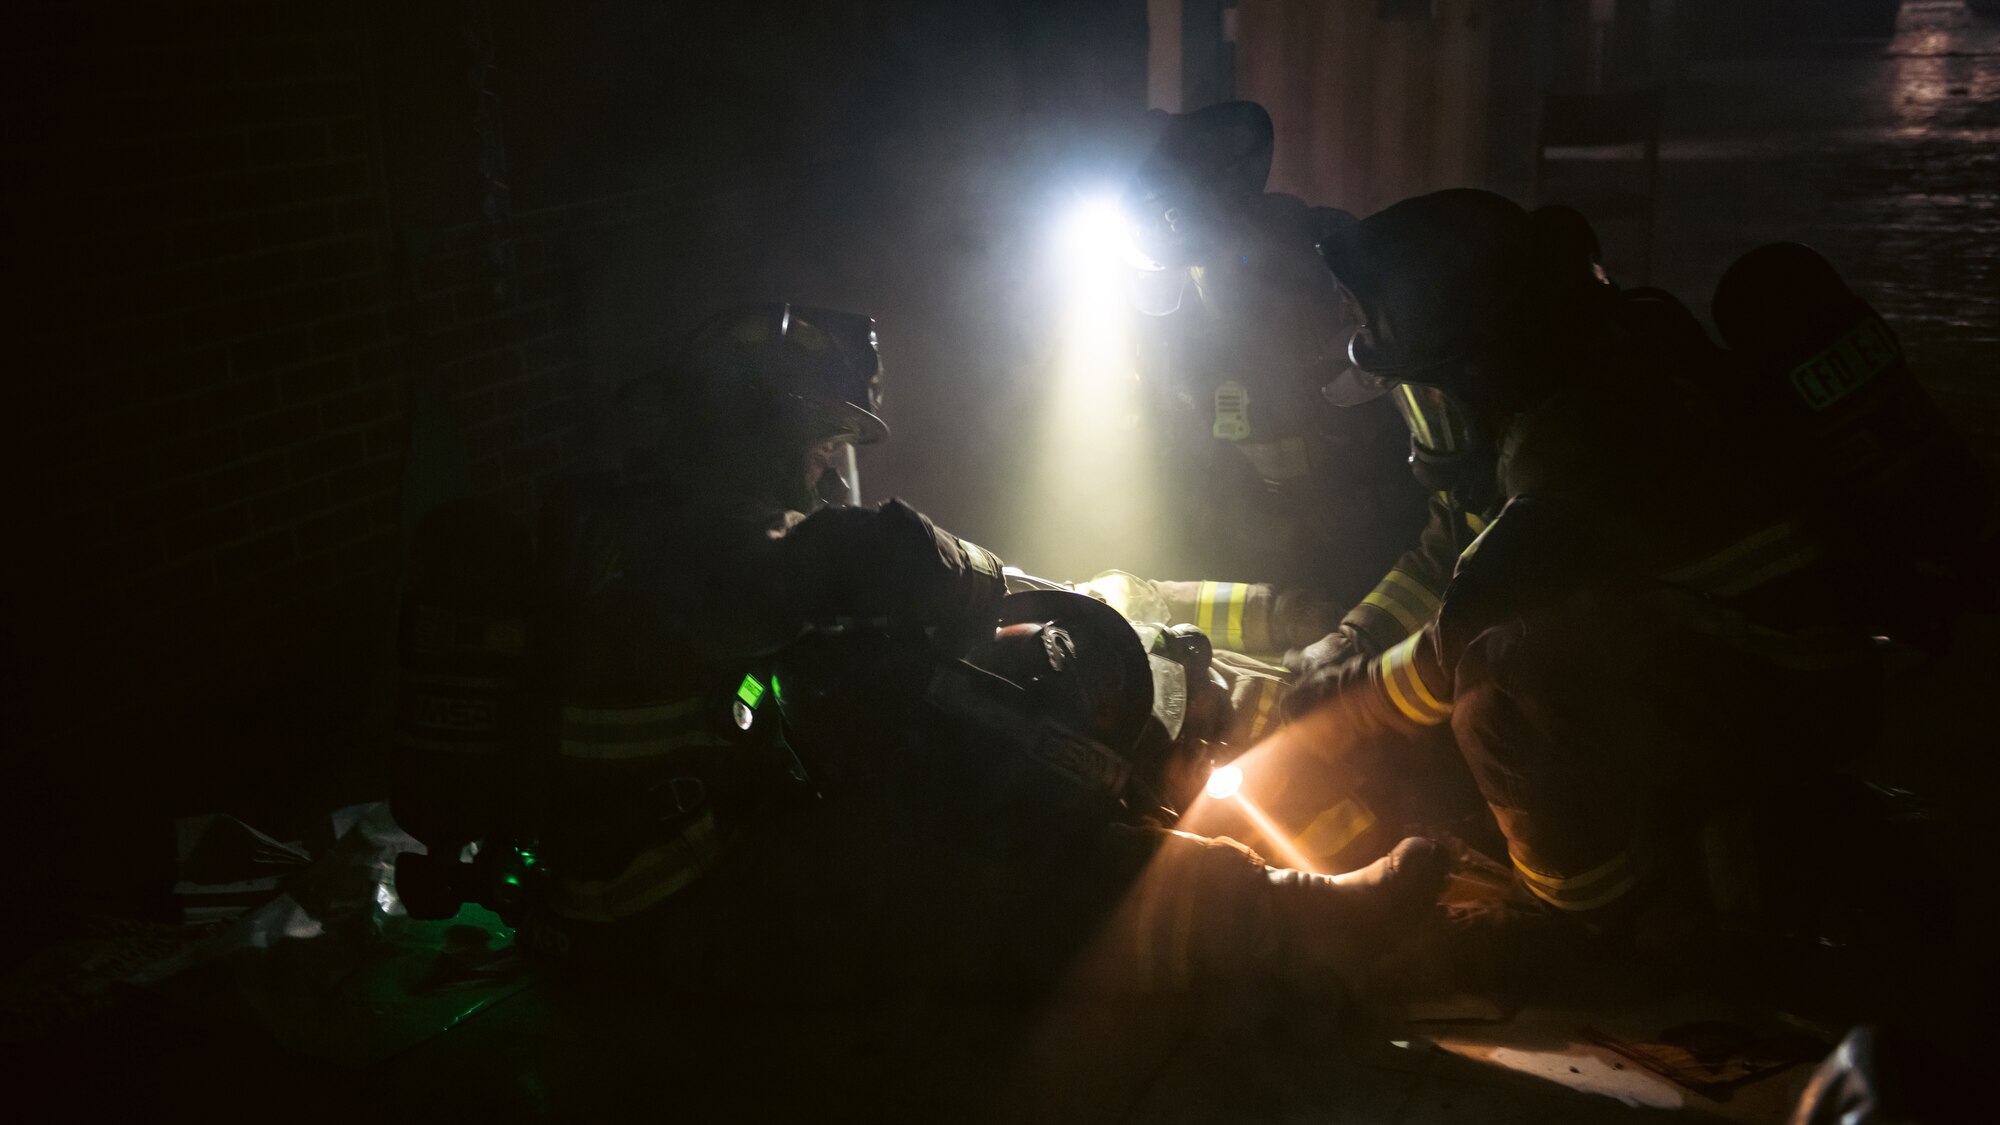 Firefighters secure a downed firefighter.